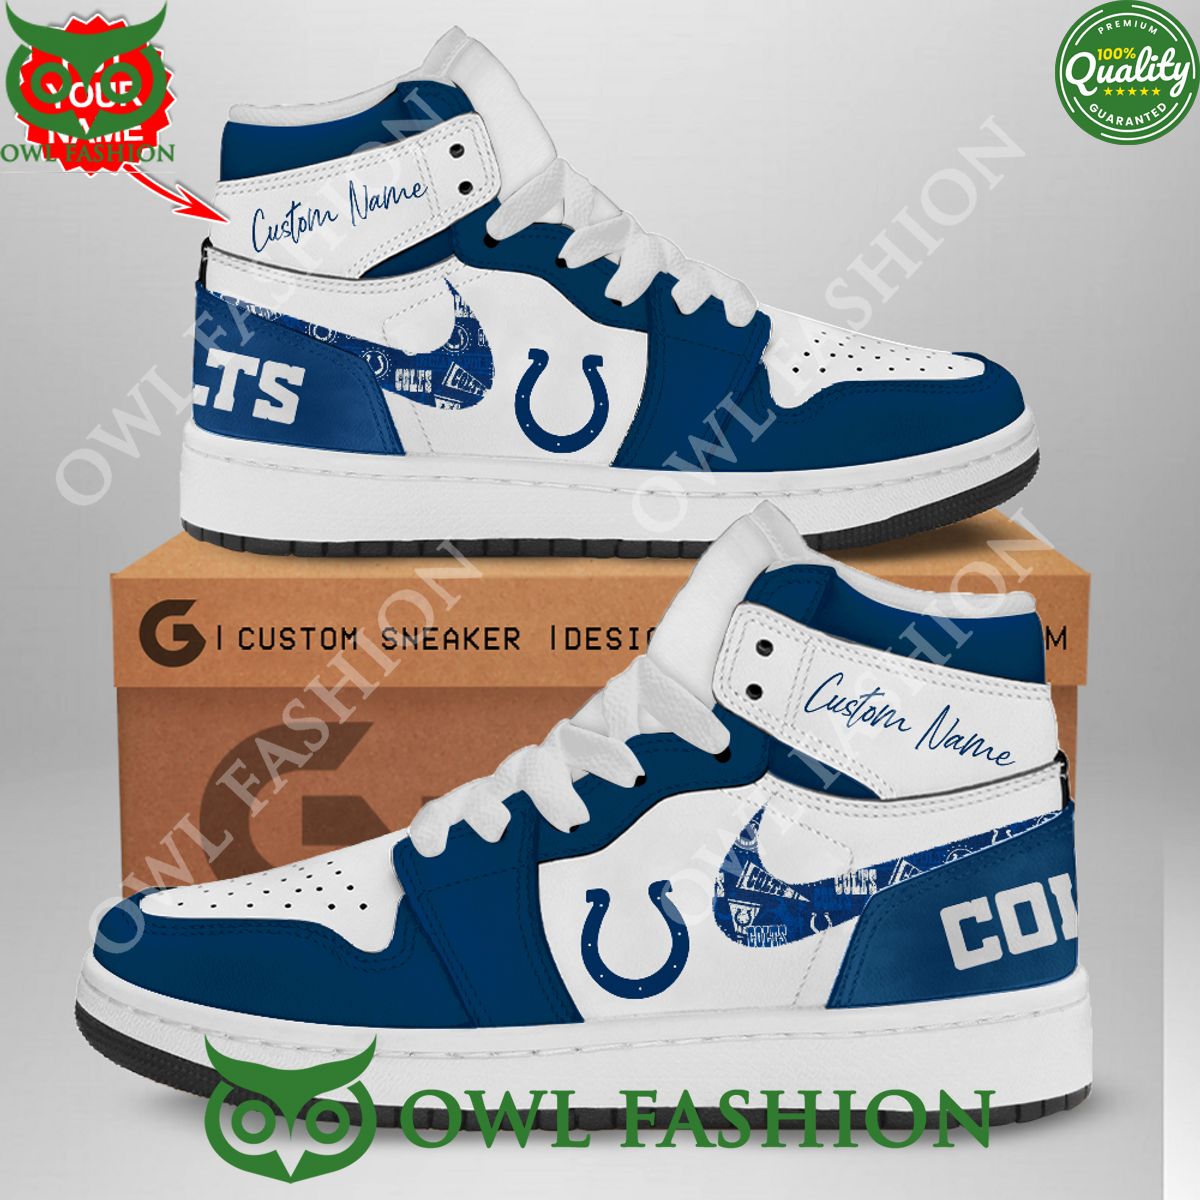 Customized Indianapolis Colts Air Jordan Limited You tried editing this time?